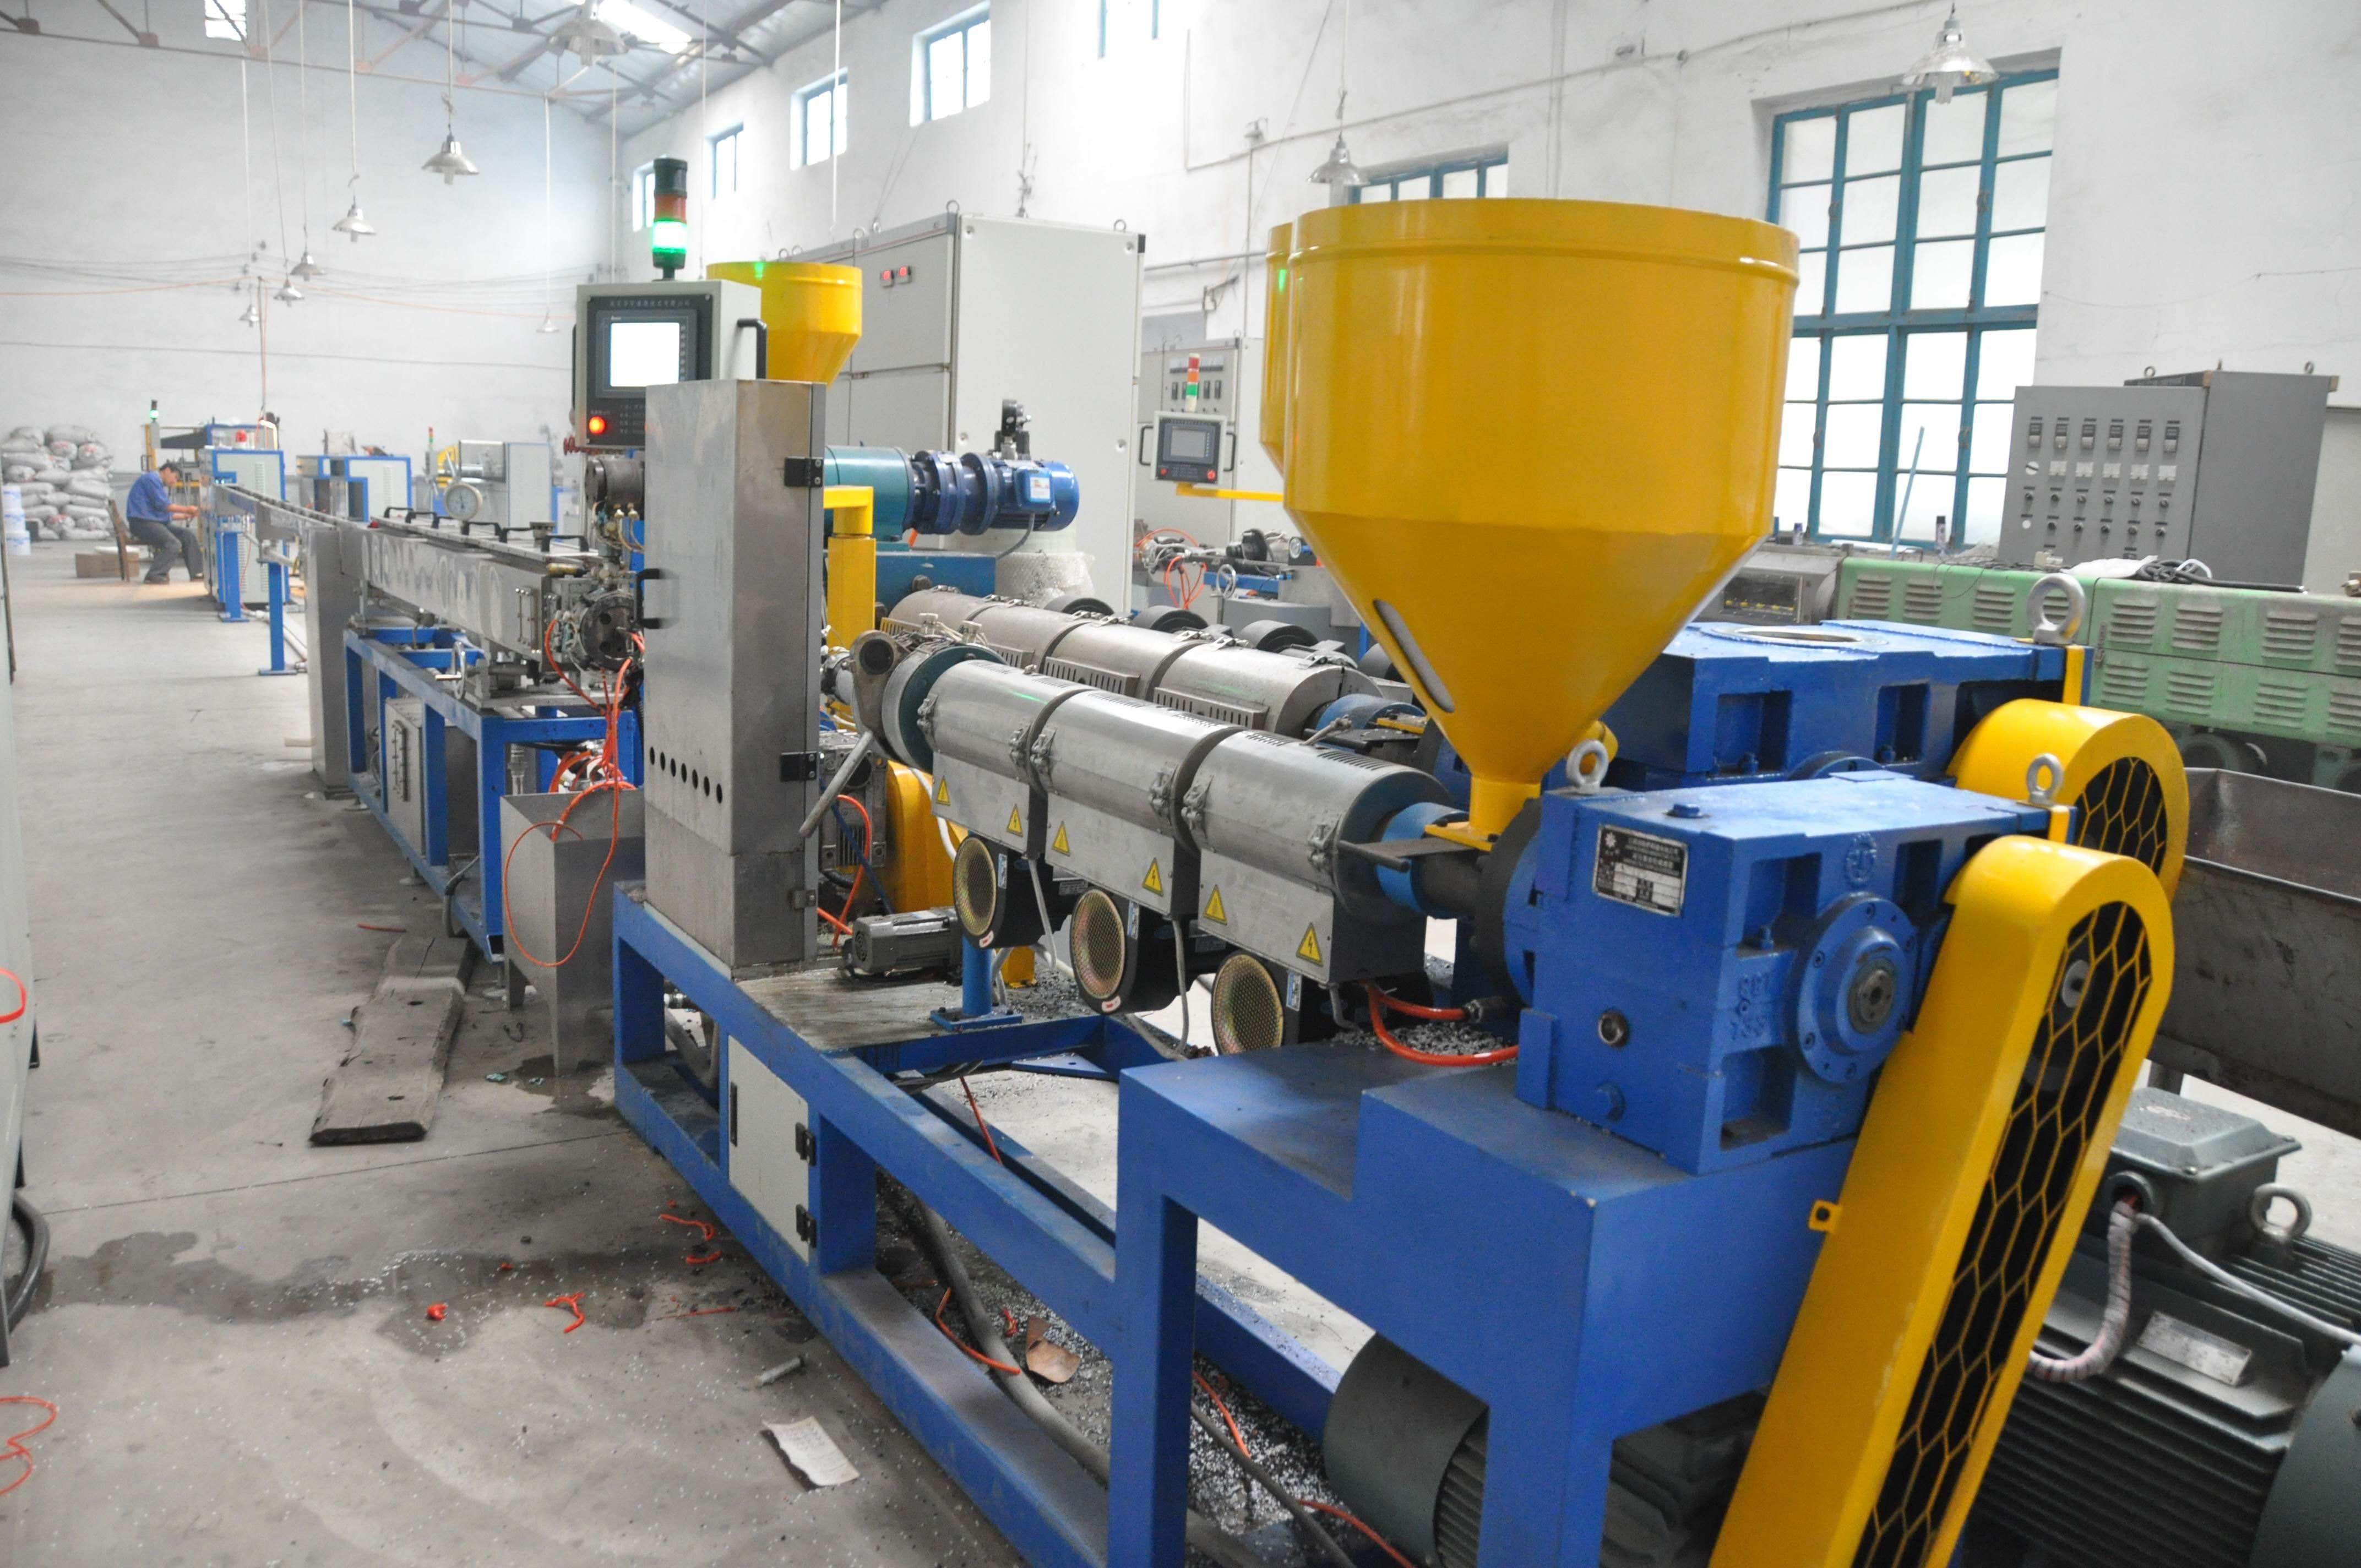 20 - 50mm One Screw Extruder Plastic Machine Single Wall Corrugated Pipe Production Line